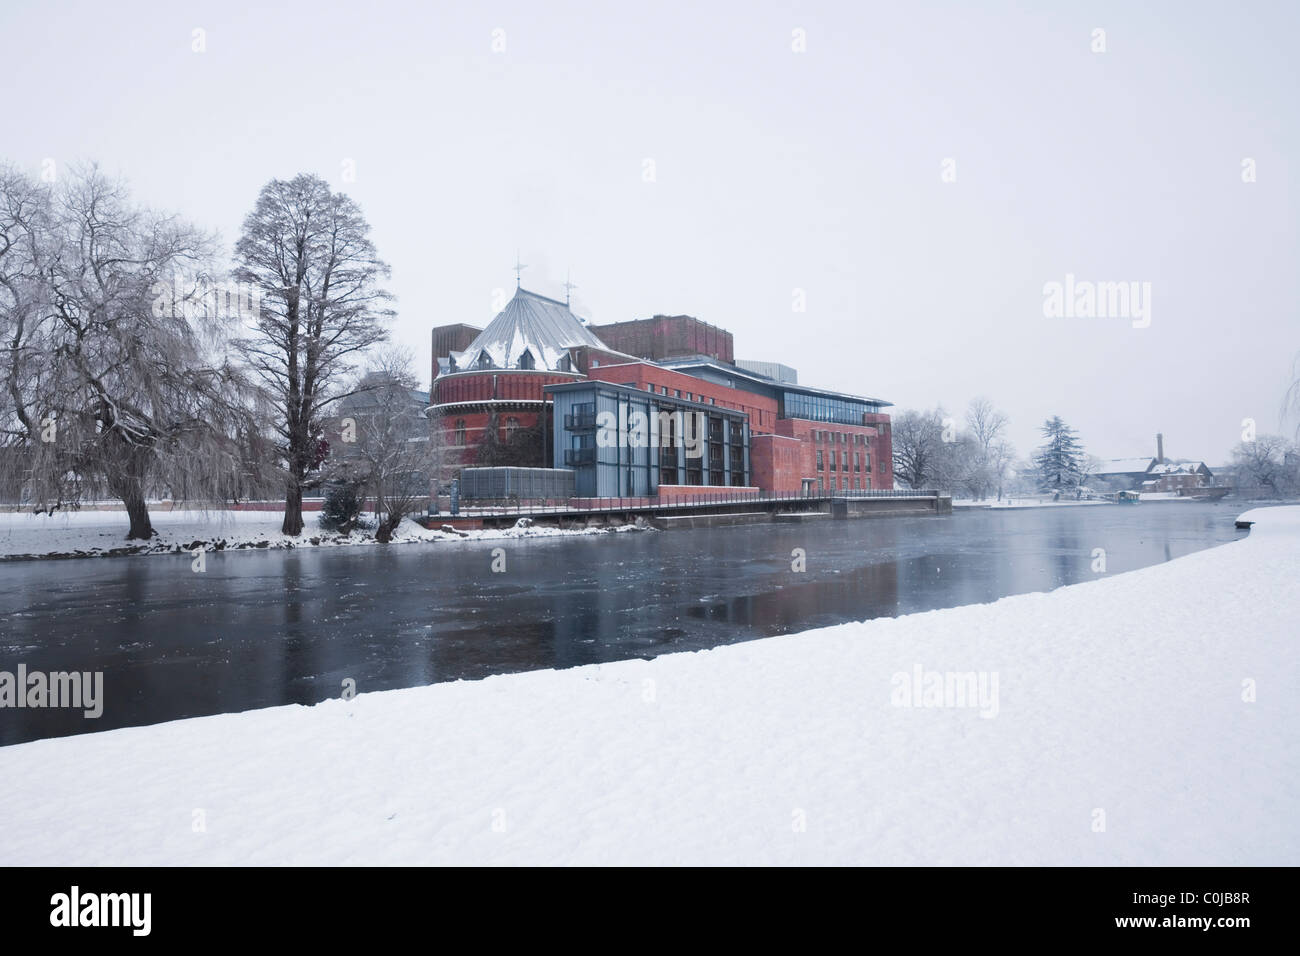 Royal Shakespeare Theatre. Stratford-upon-Avon. Le Warwickshire. L'Angleterre. UK. Banque D'Images